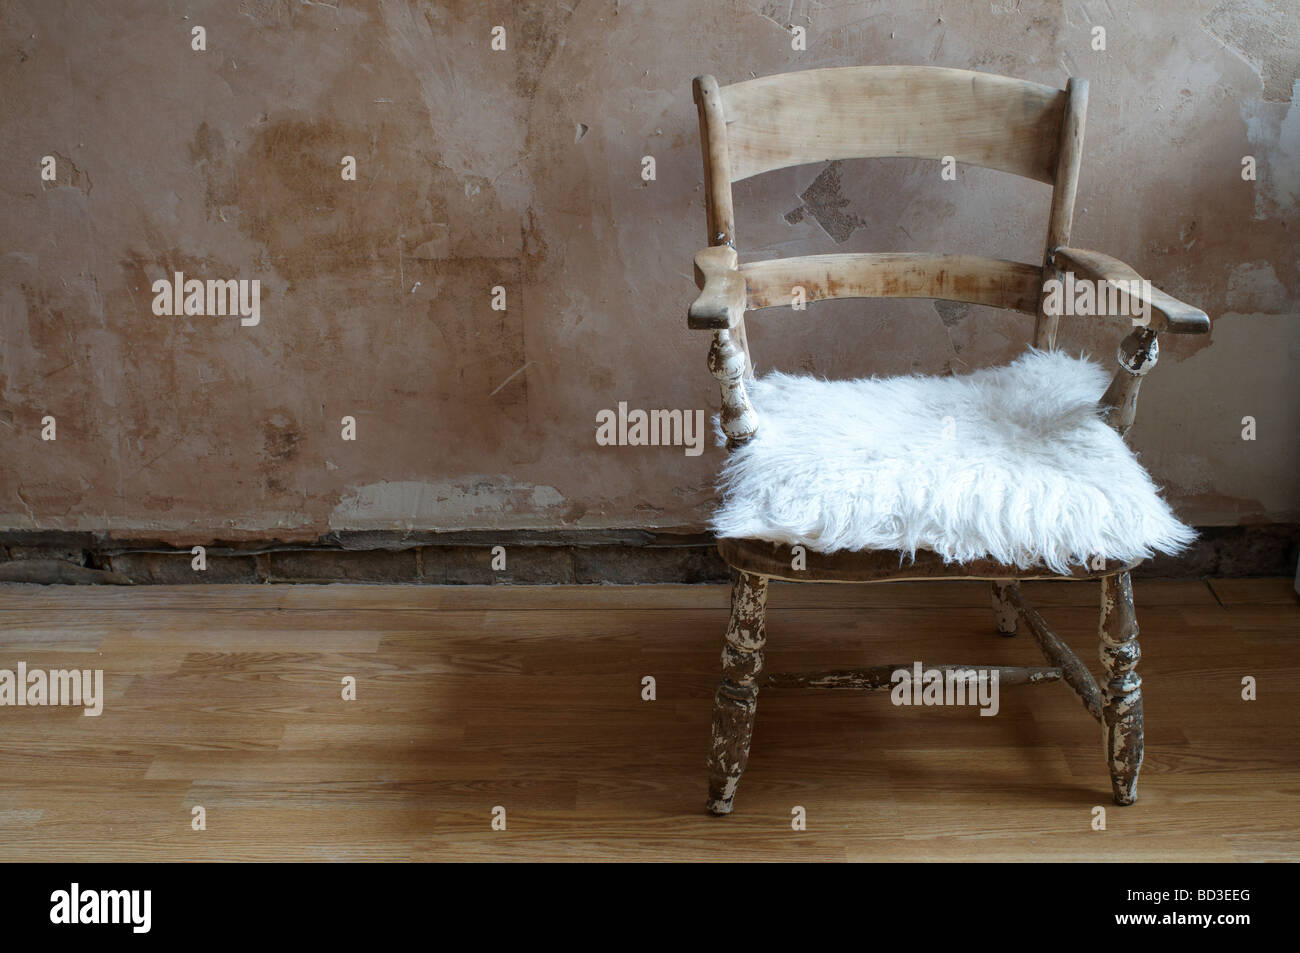 wooden chair on wooden floor, with bare plaster wall, fluffy white cushion Stock Photo